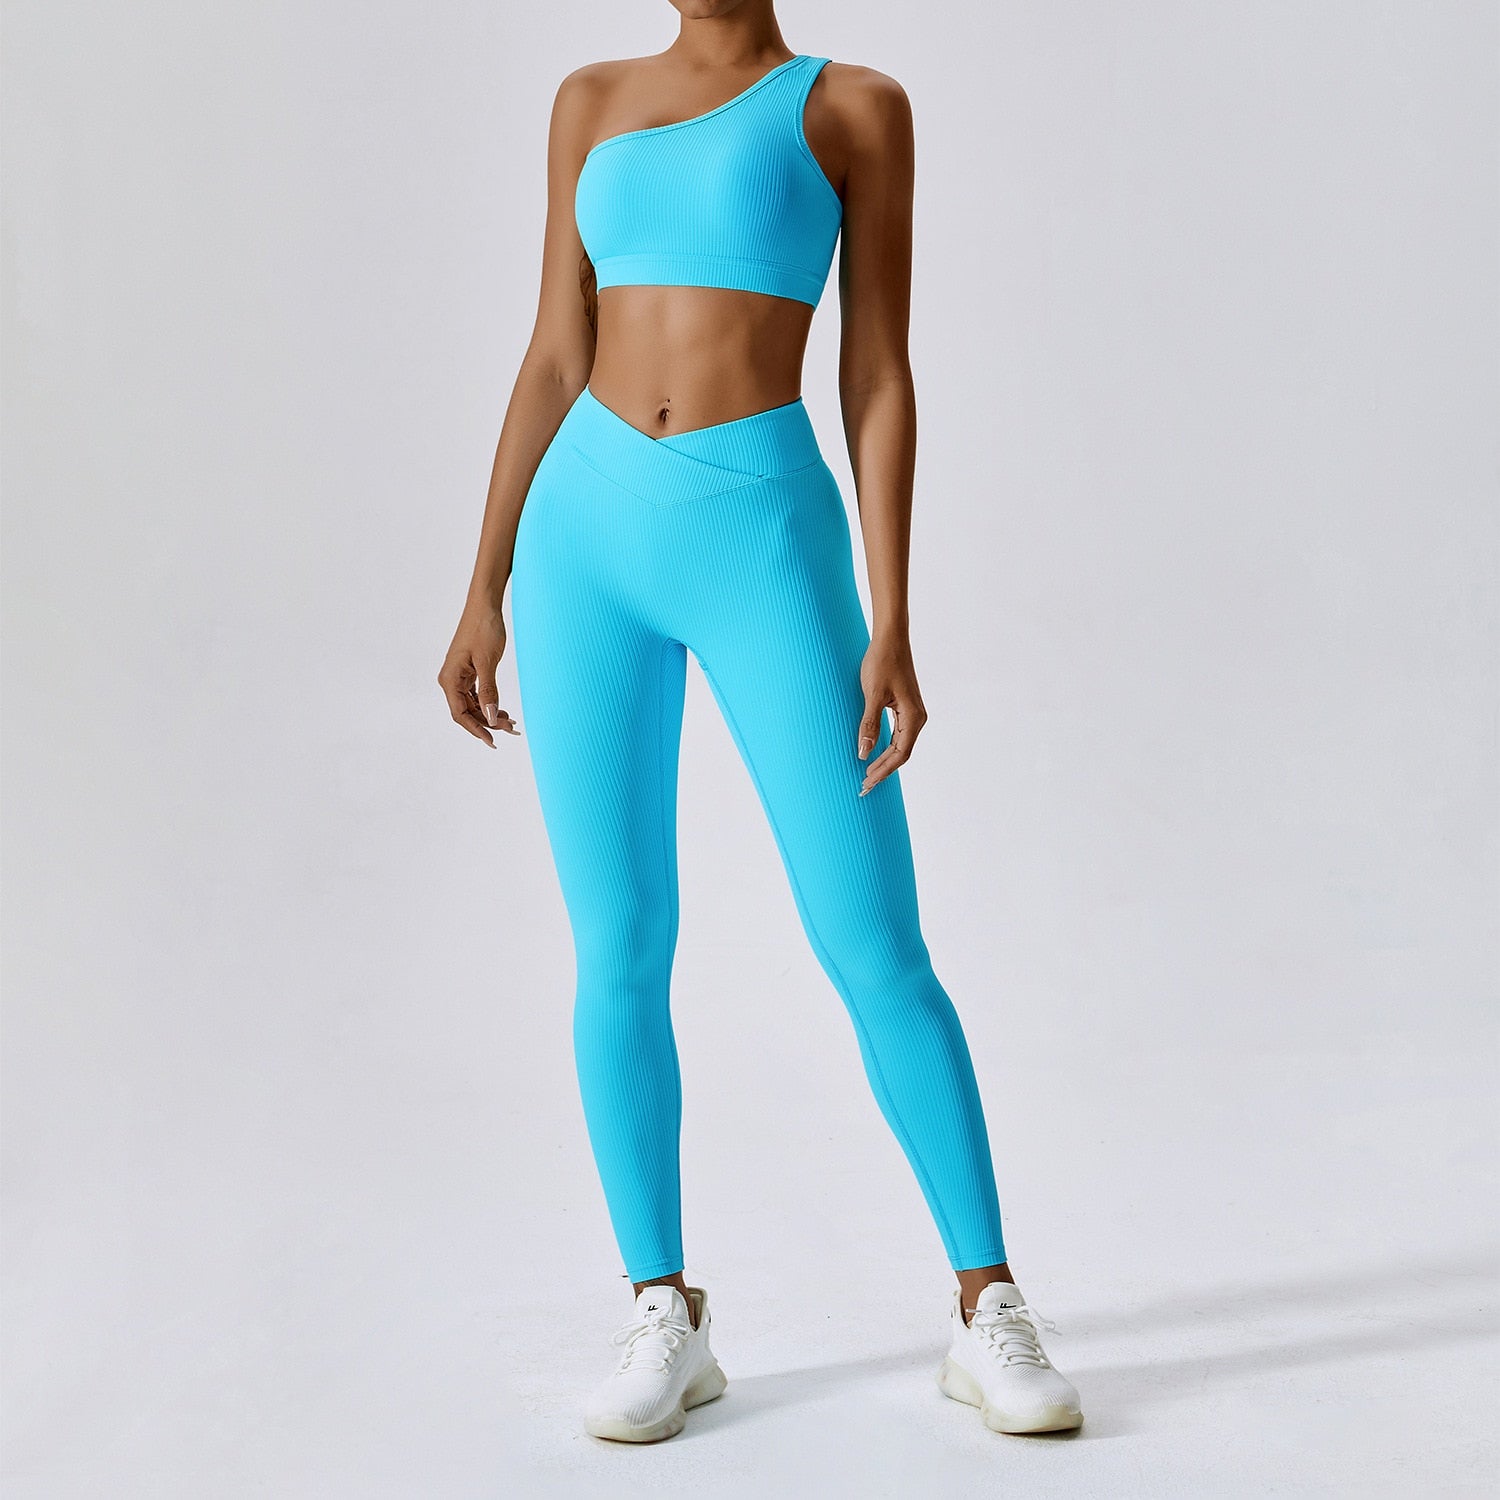 Ribbed Yoga Set Sportswear Women Suit For Fitness Clothing Sports Suit Workout Clothes Tracksuit Sports Outfit Gym Clothing Wear BlueSet-4XLChina  71.99 EZYSELLA SHOP